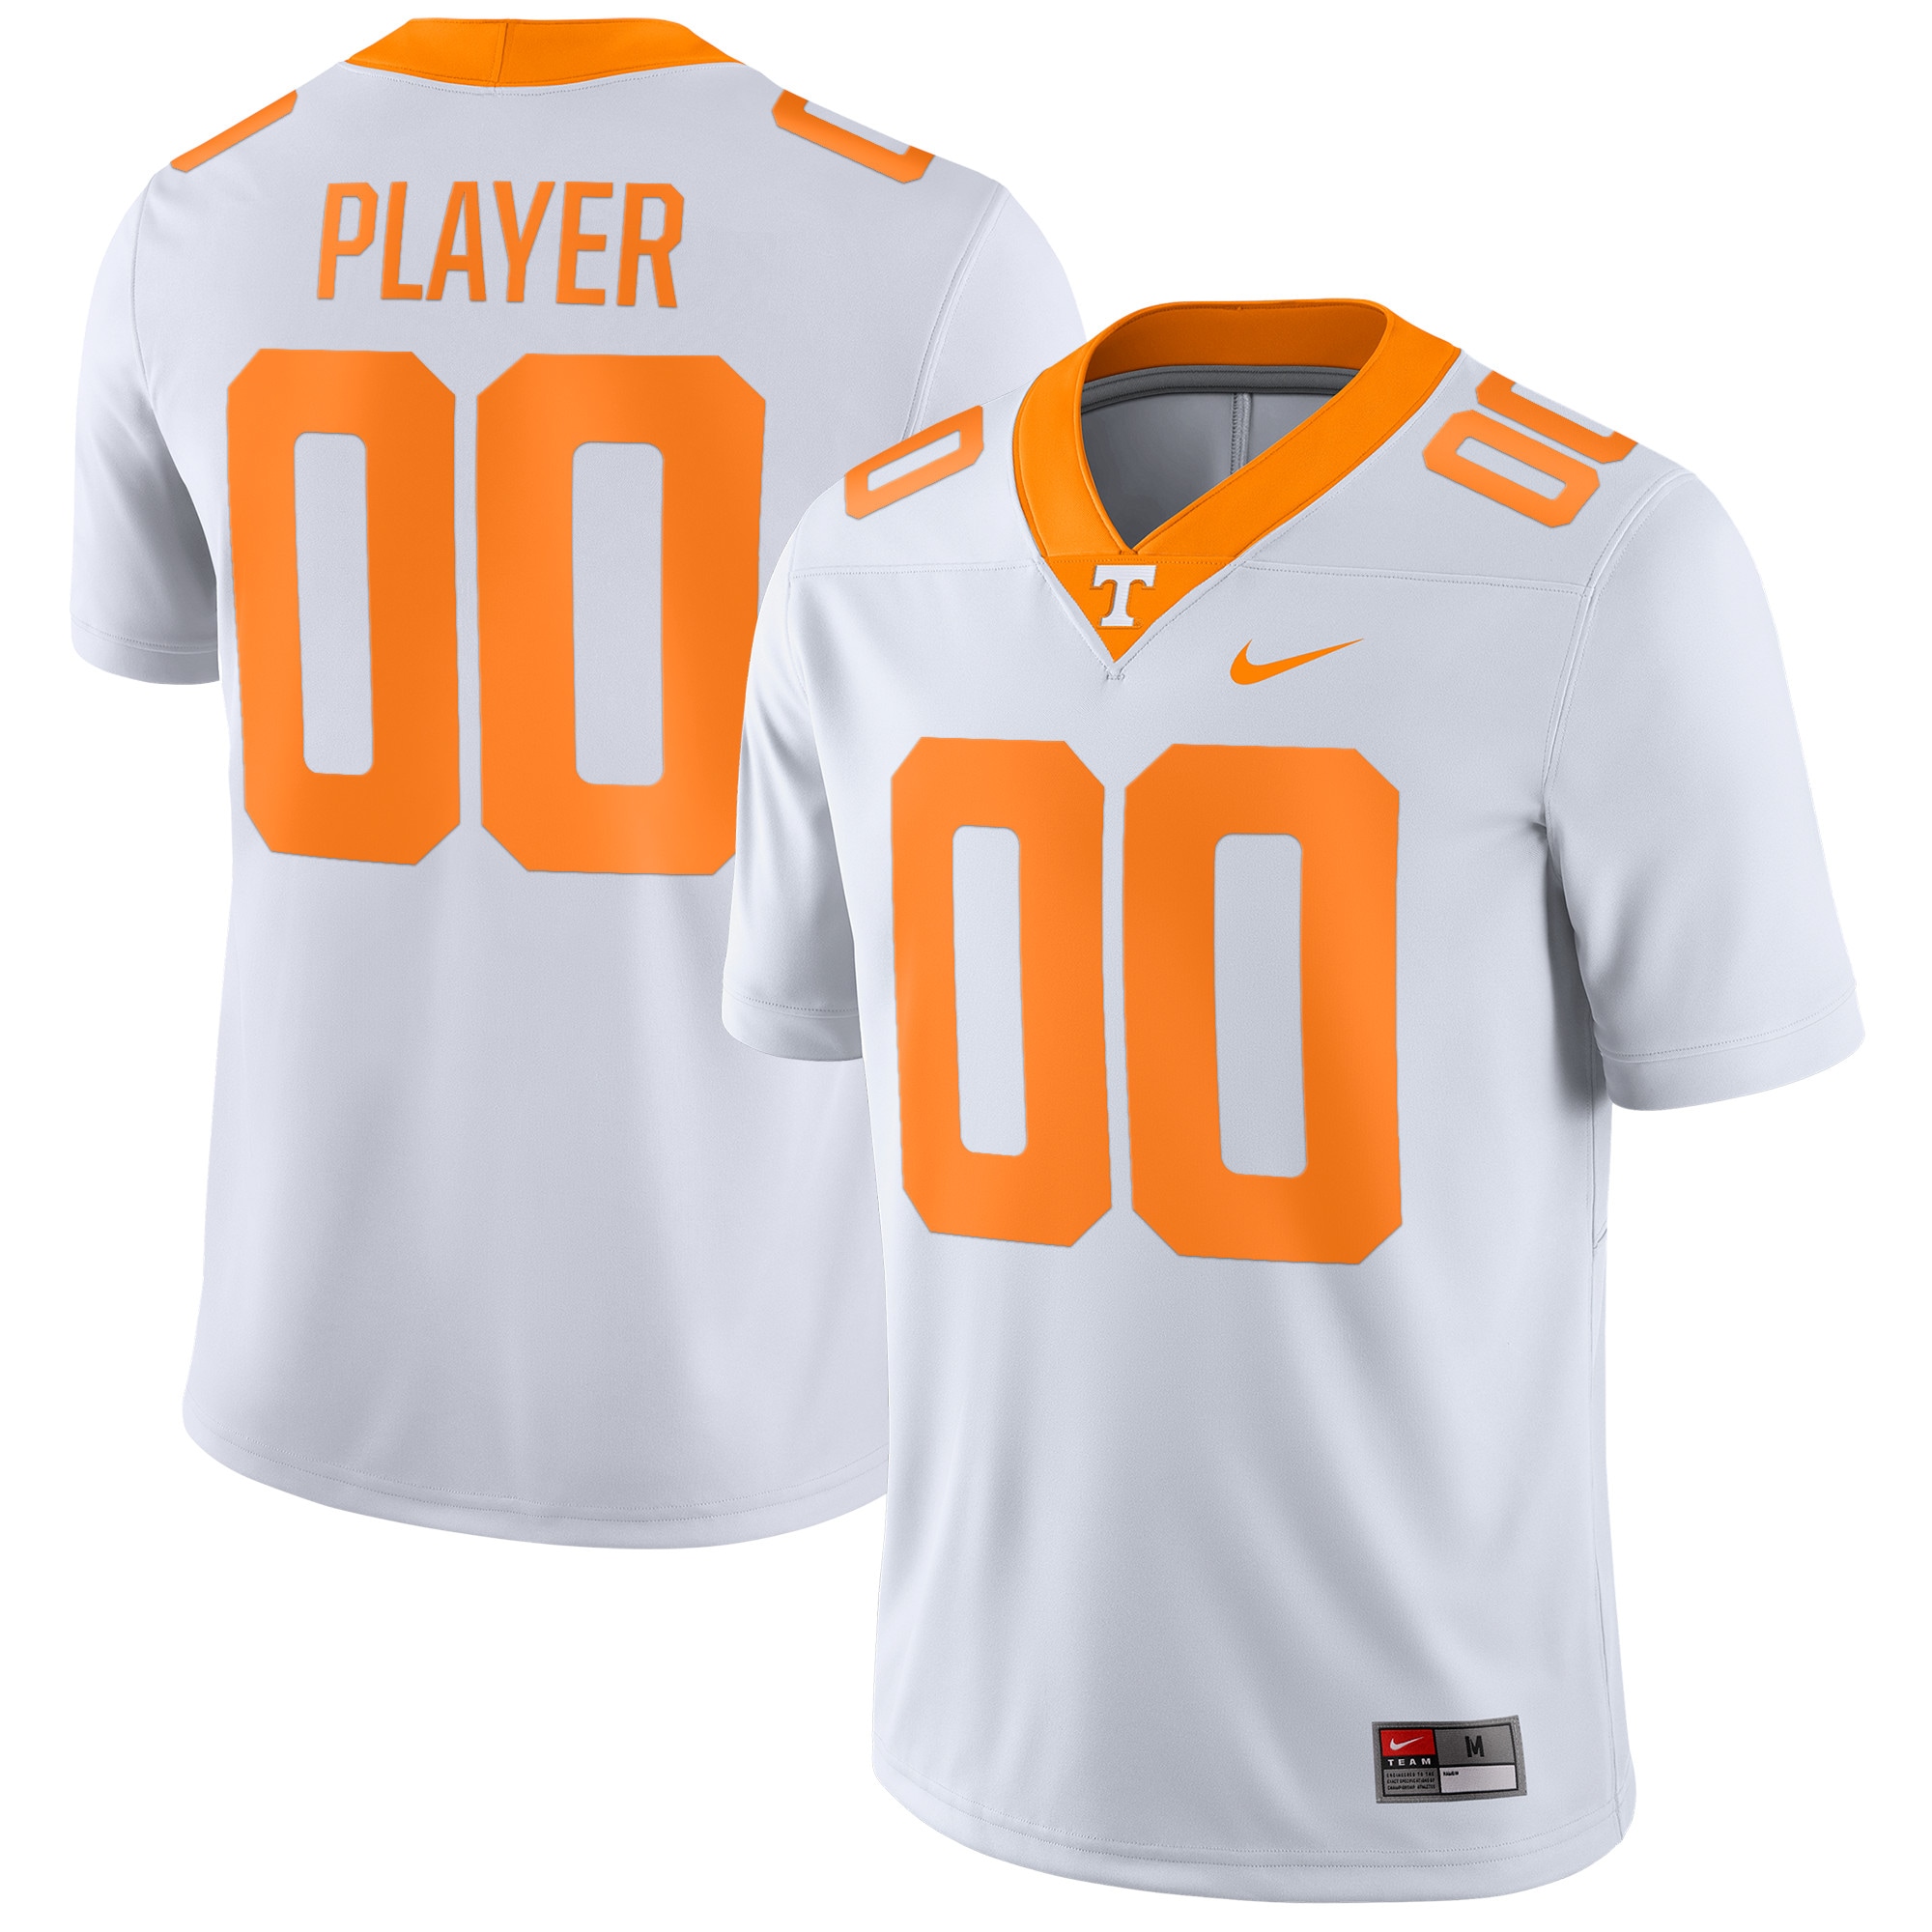 Tennessee Volunteers Pick-A-Player Nil Replica  Football Shirts Jersey - White For Youth Women Men